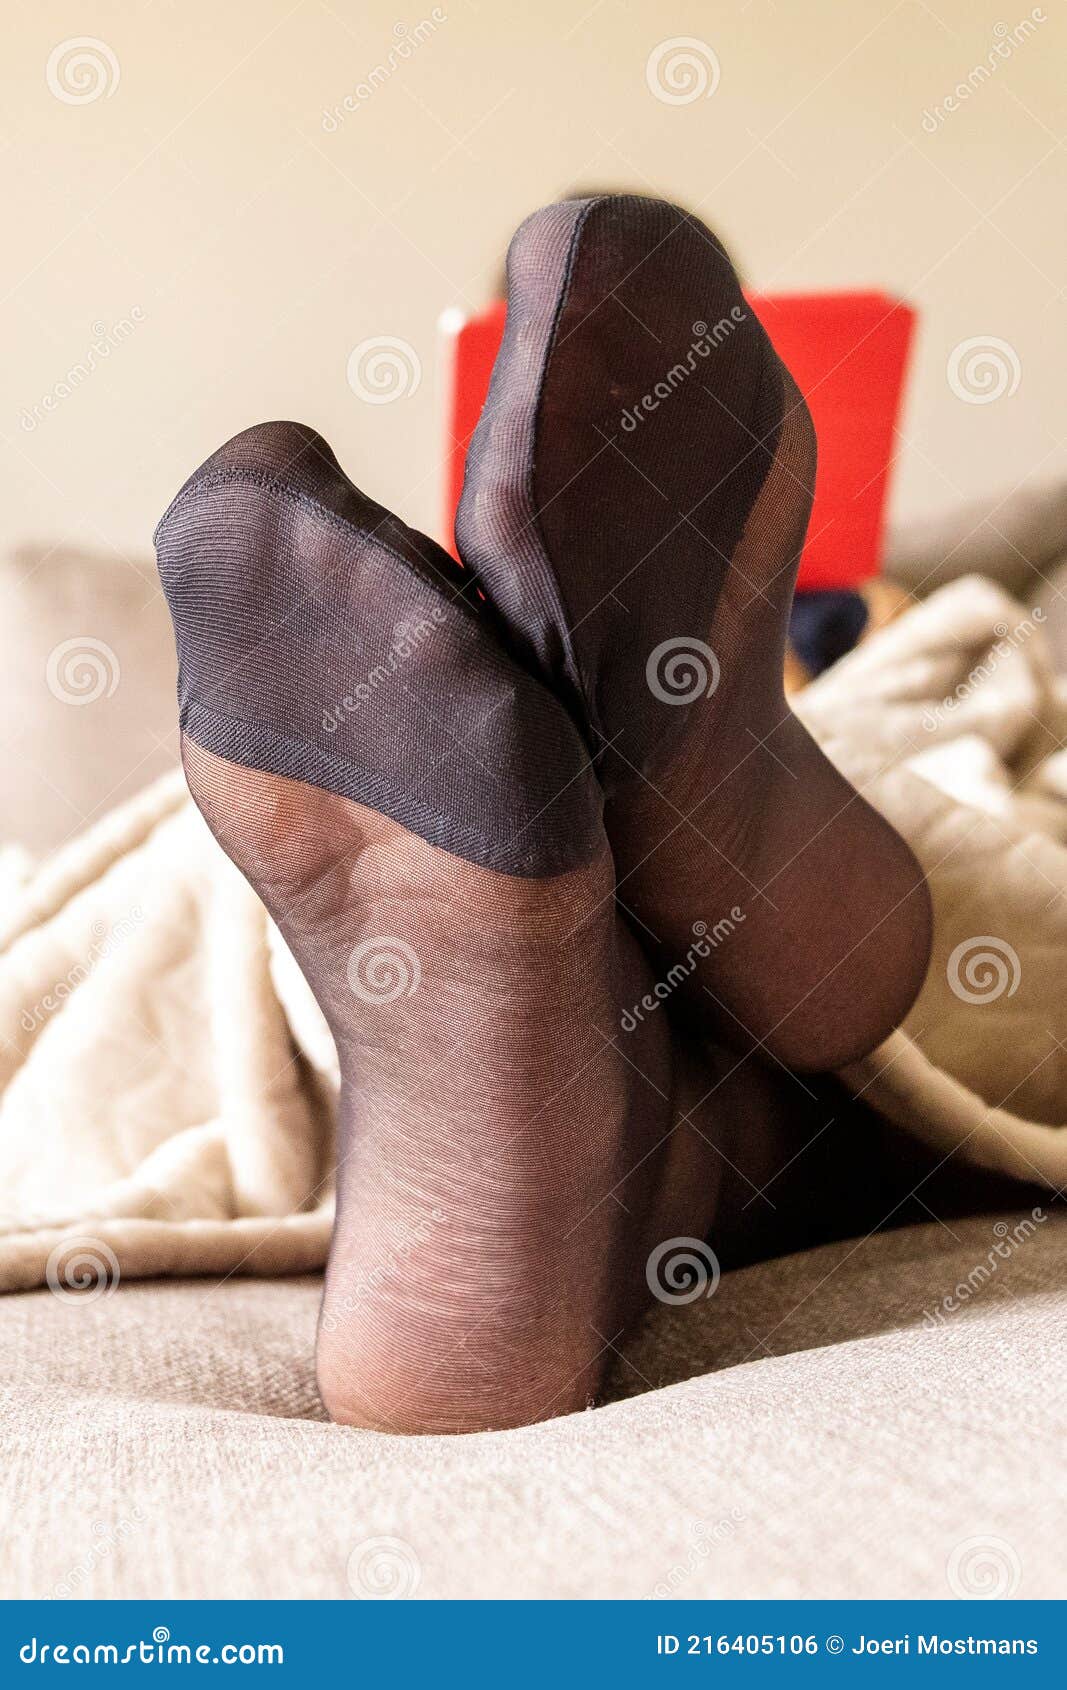 A Portrait of a Woman& X27;s Feet Wearing Black Nylon Stockings or Pantyhose  with Reinforces Toes on a Cosy Couch in a Living Room Stock Photo - Image  of nylon, foot: 216405106